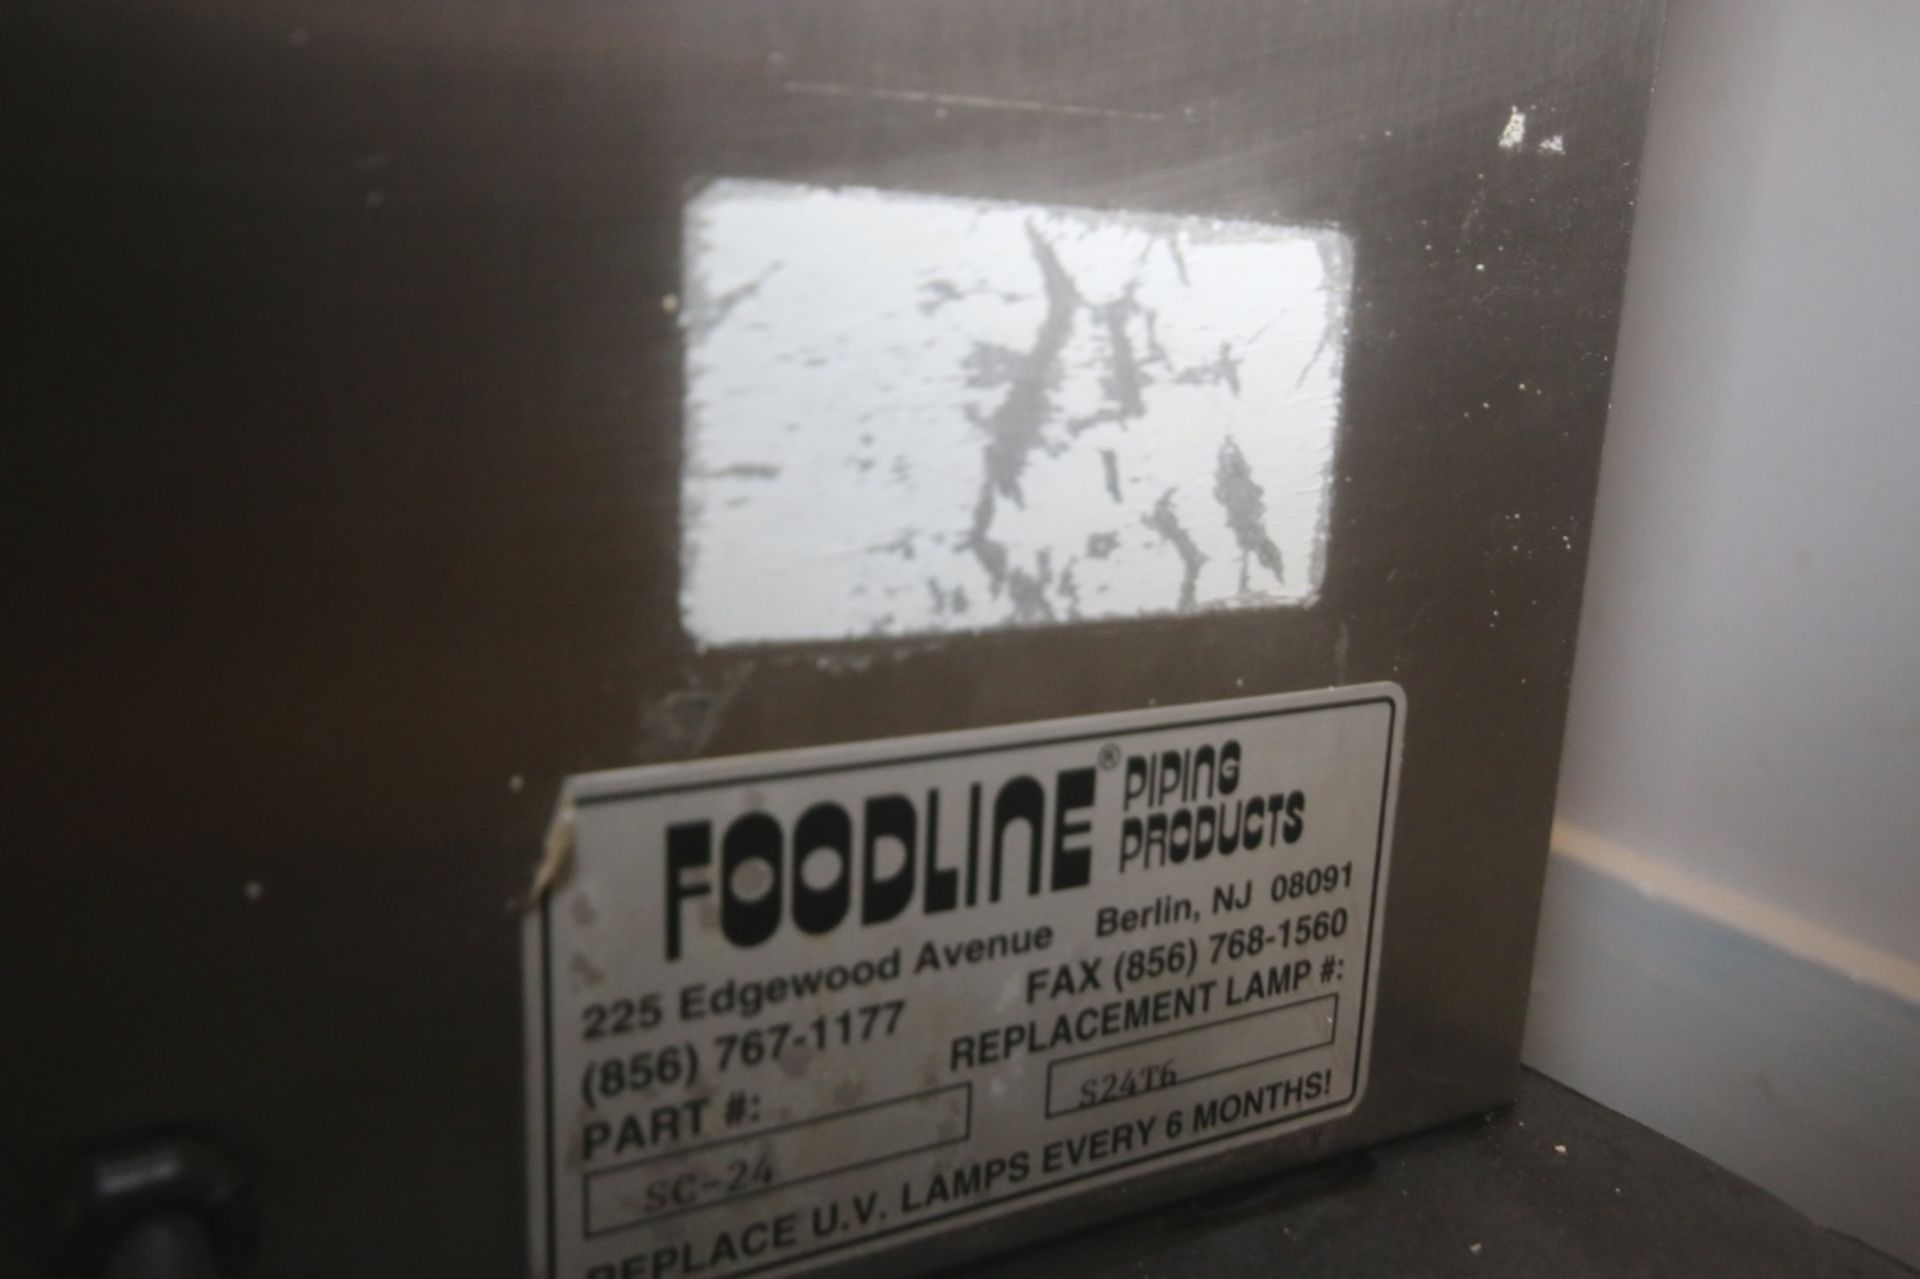 Foodline UV Lights with S/S Duct, Part #: SC-24, Replacement Lamp: S24T6, with Spare Piping & - Image 4 of 7